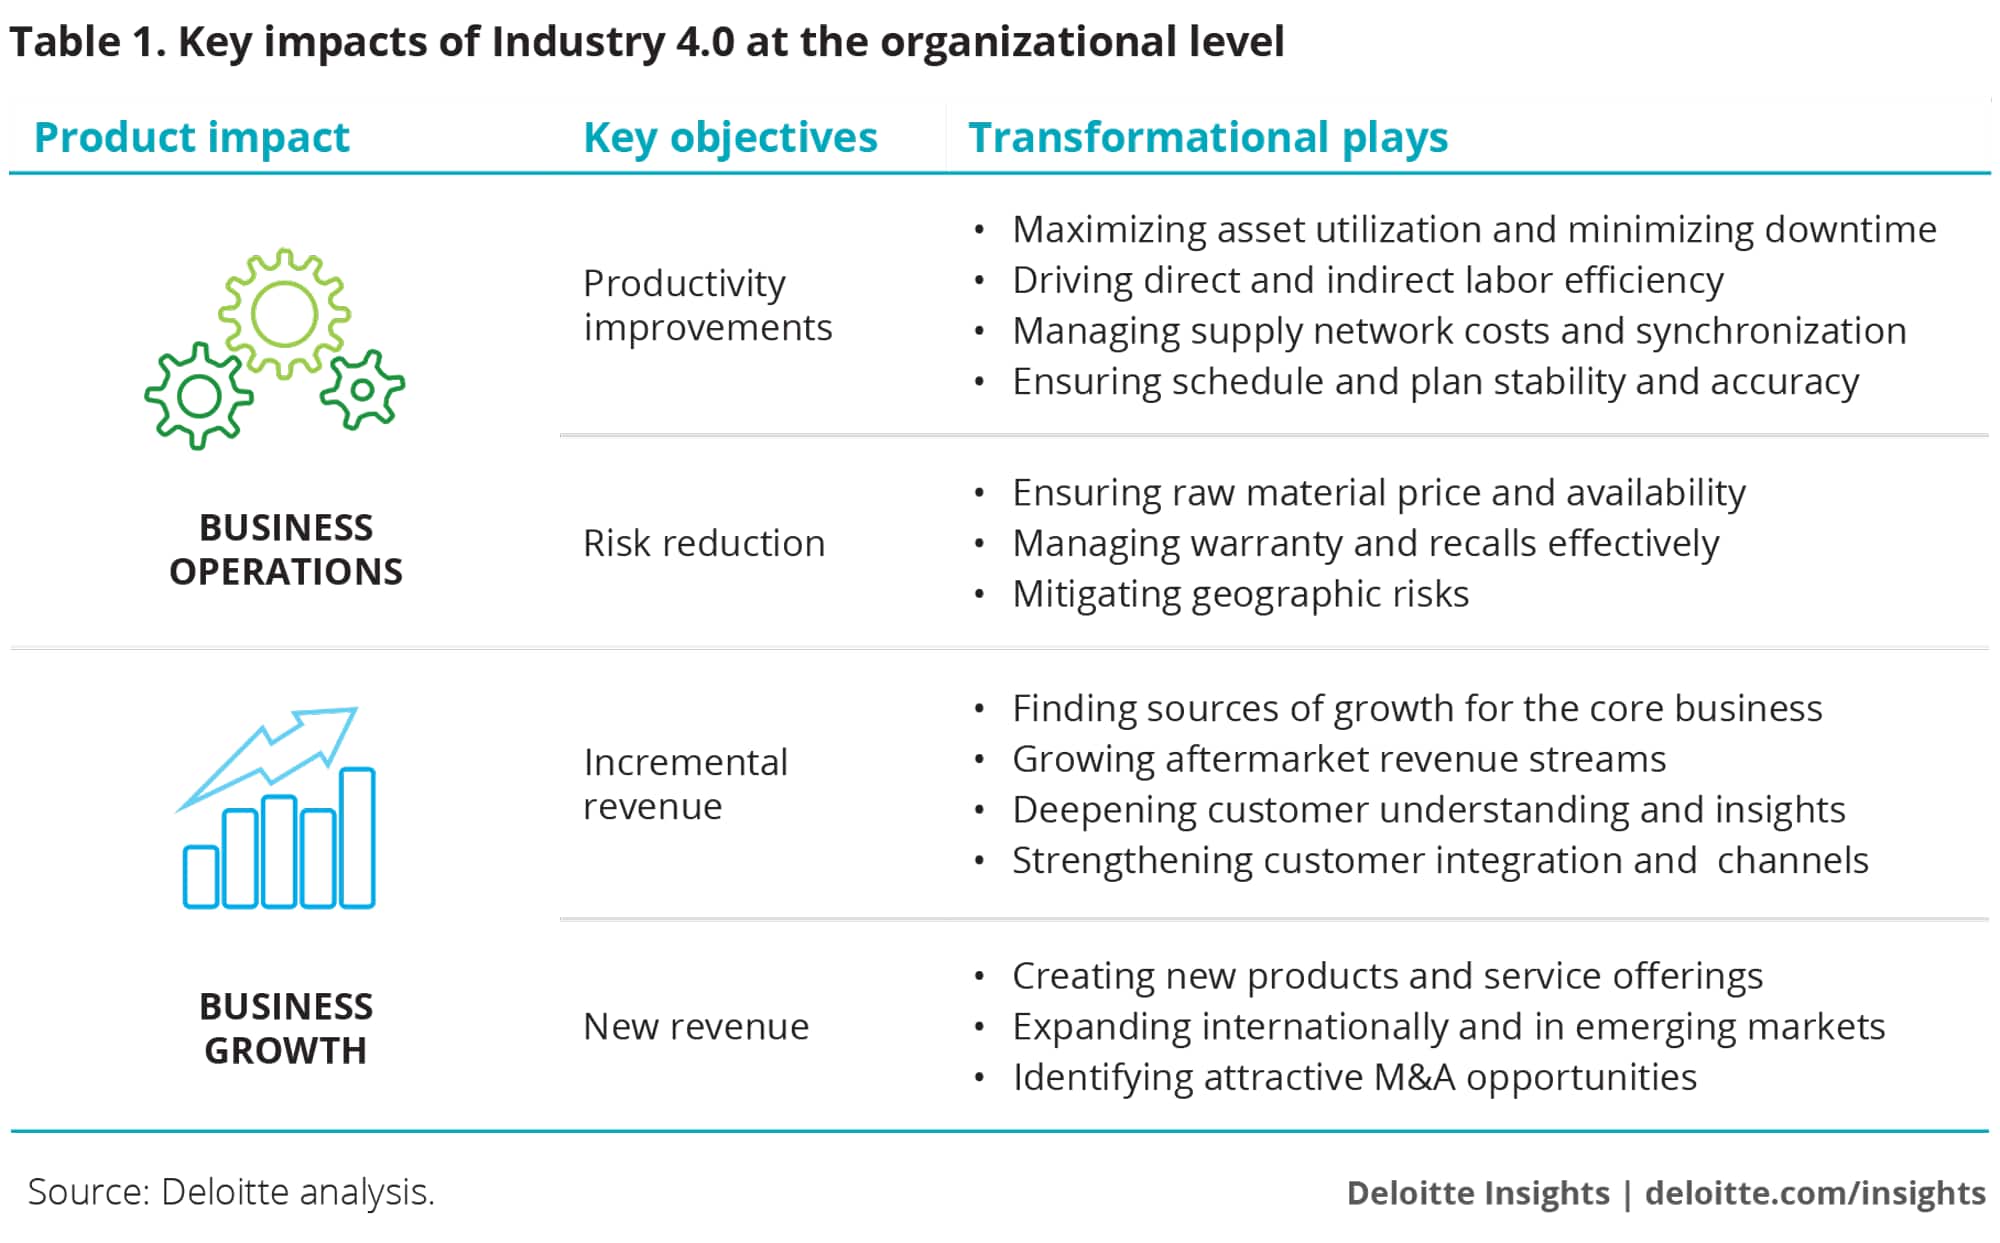 Key impacts of Industry 4.0 at the organizational level